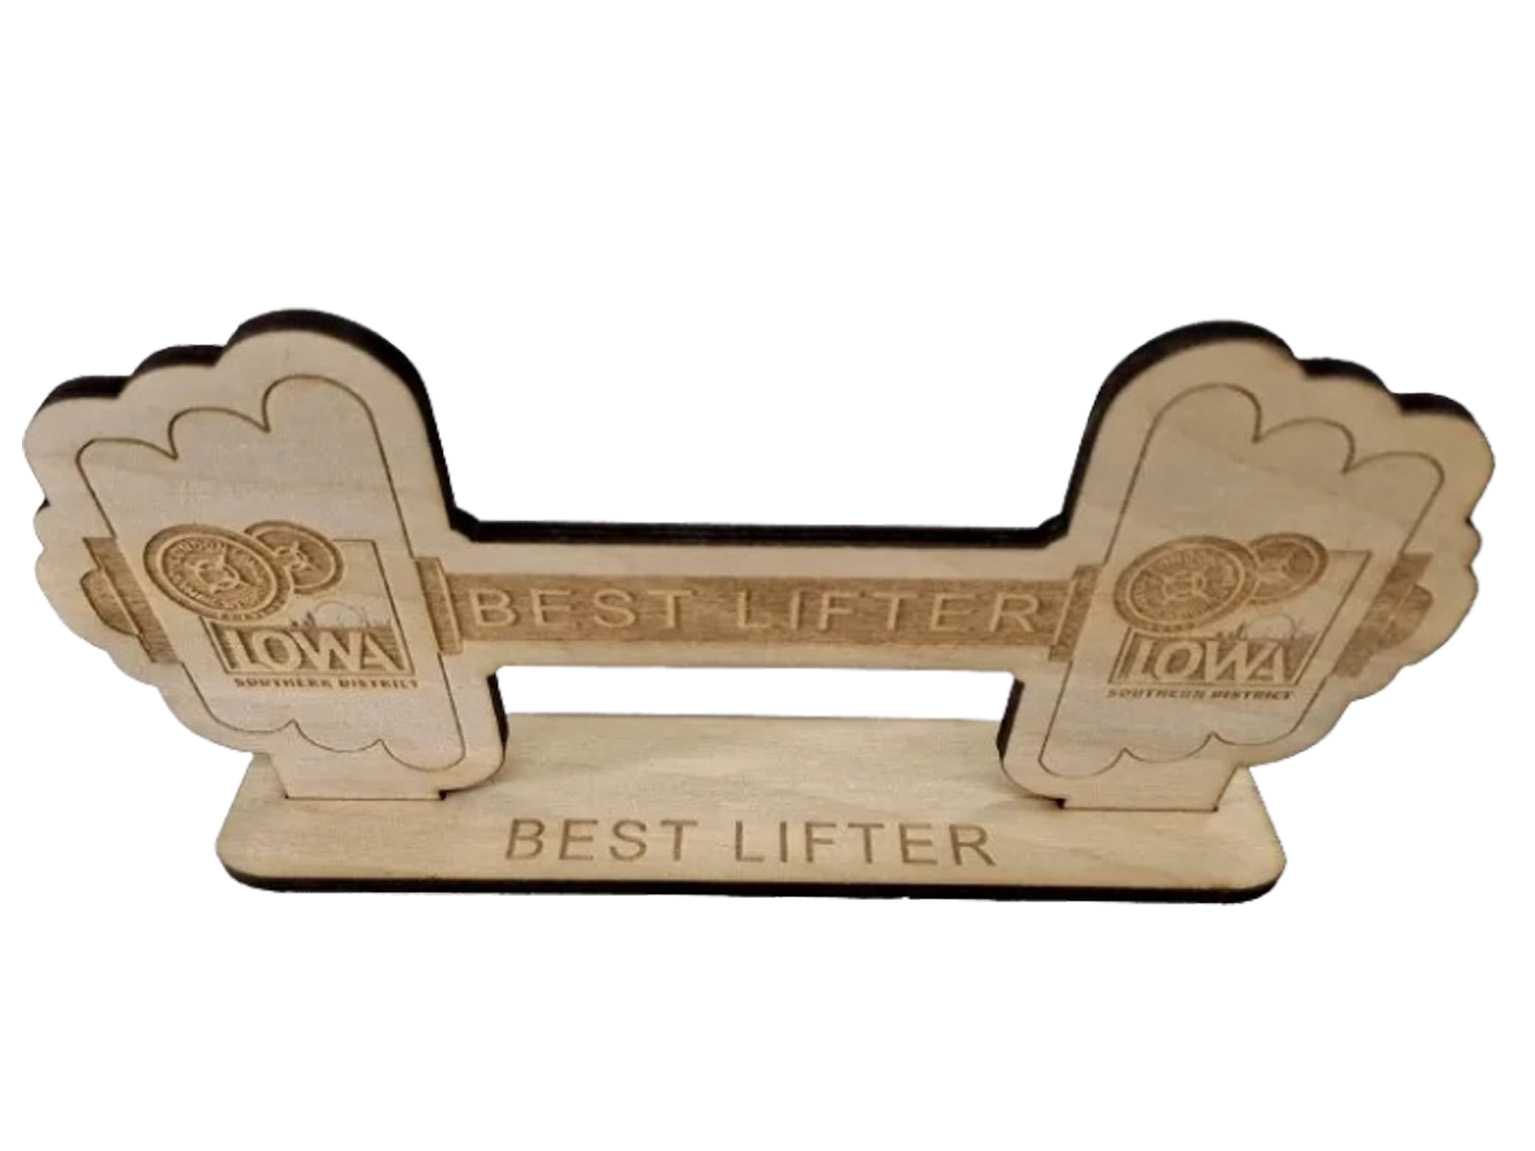 A sustainable wooden sign that proudly displays the title of "best lifter".